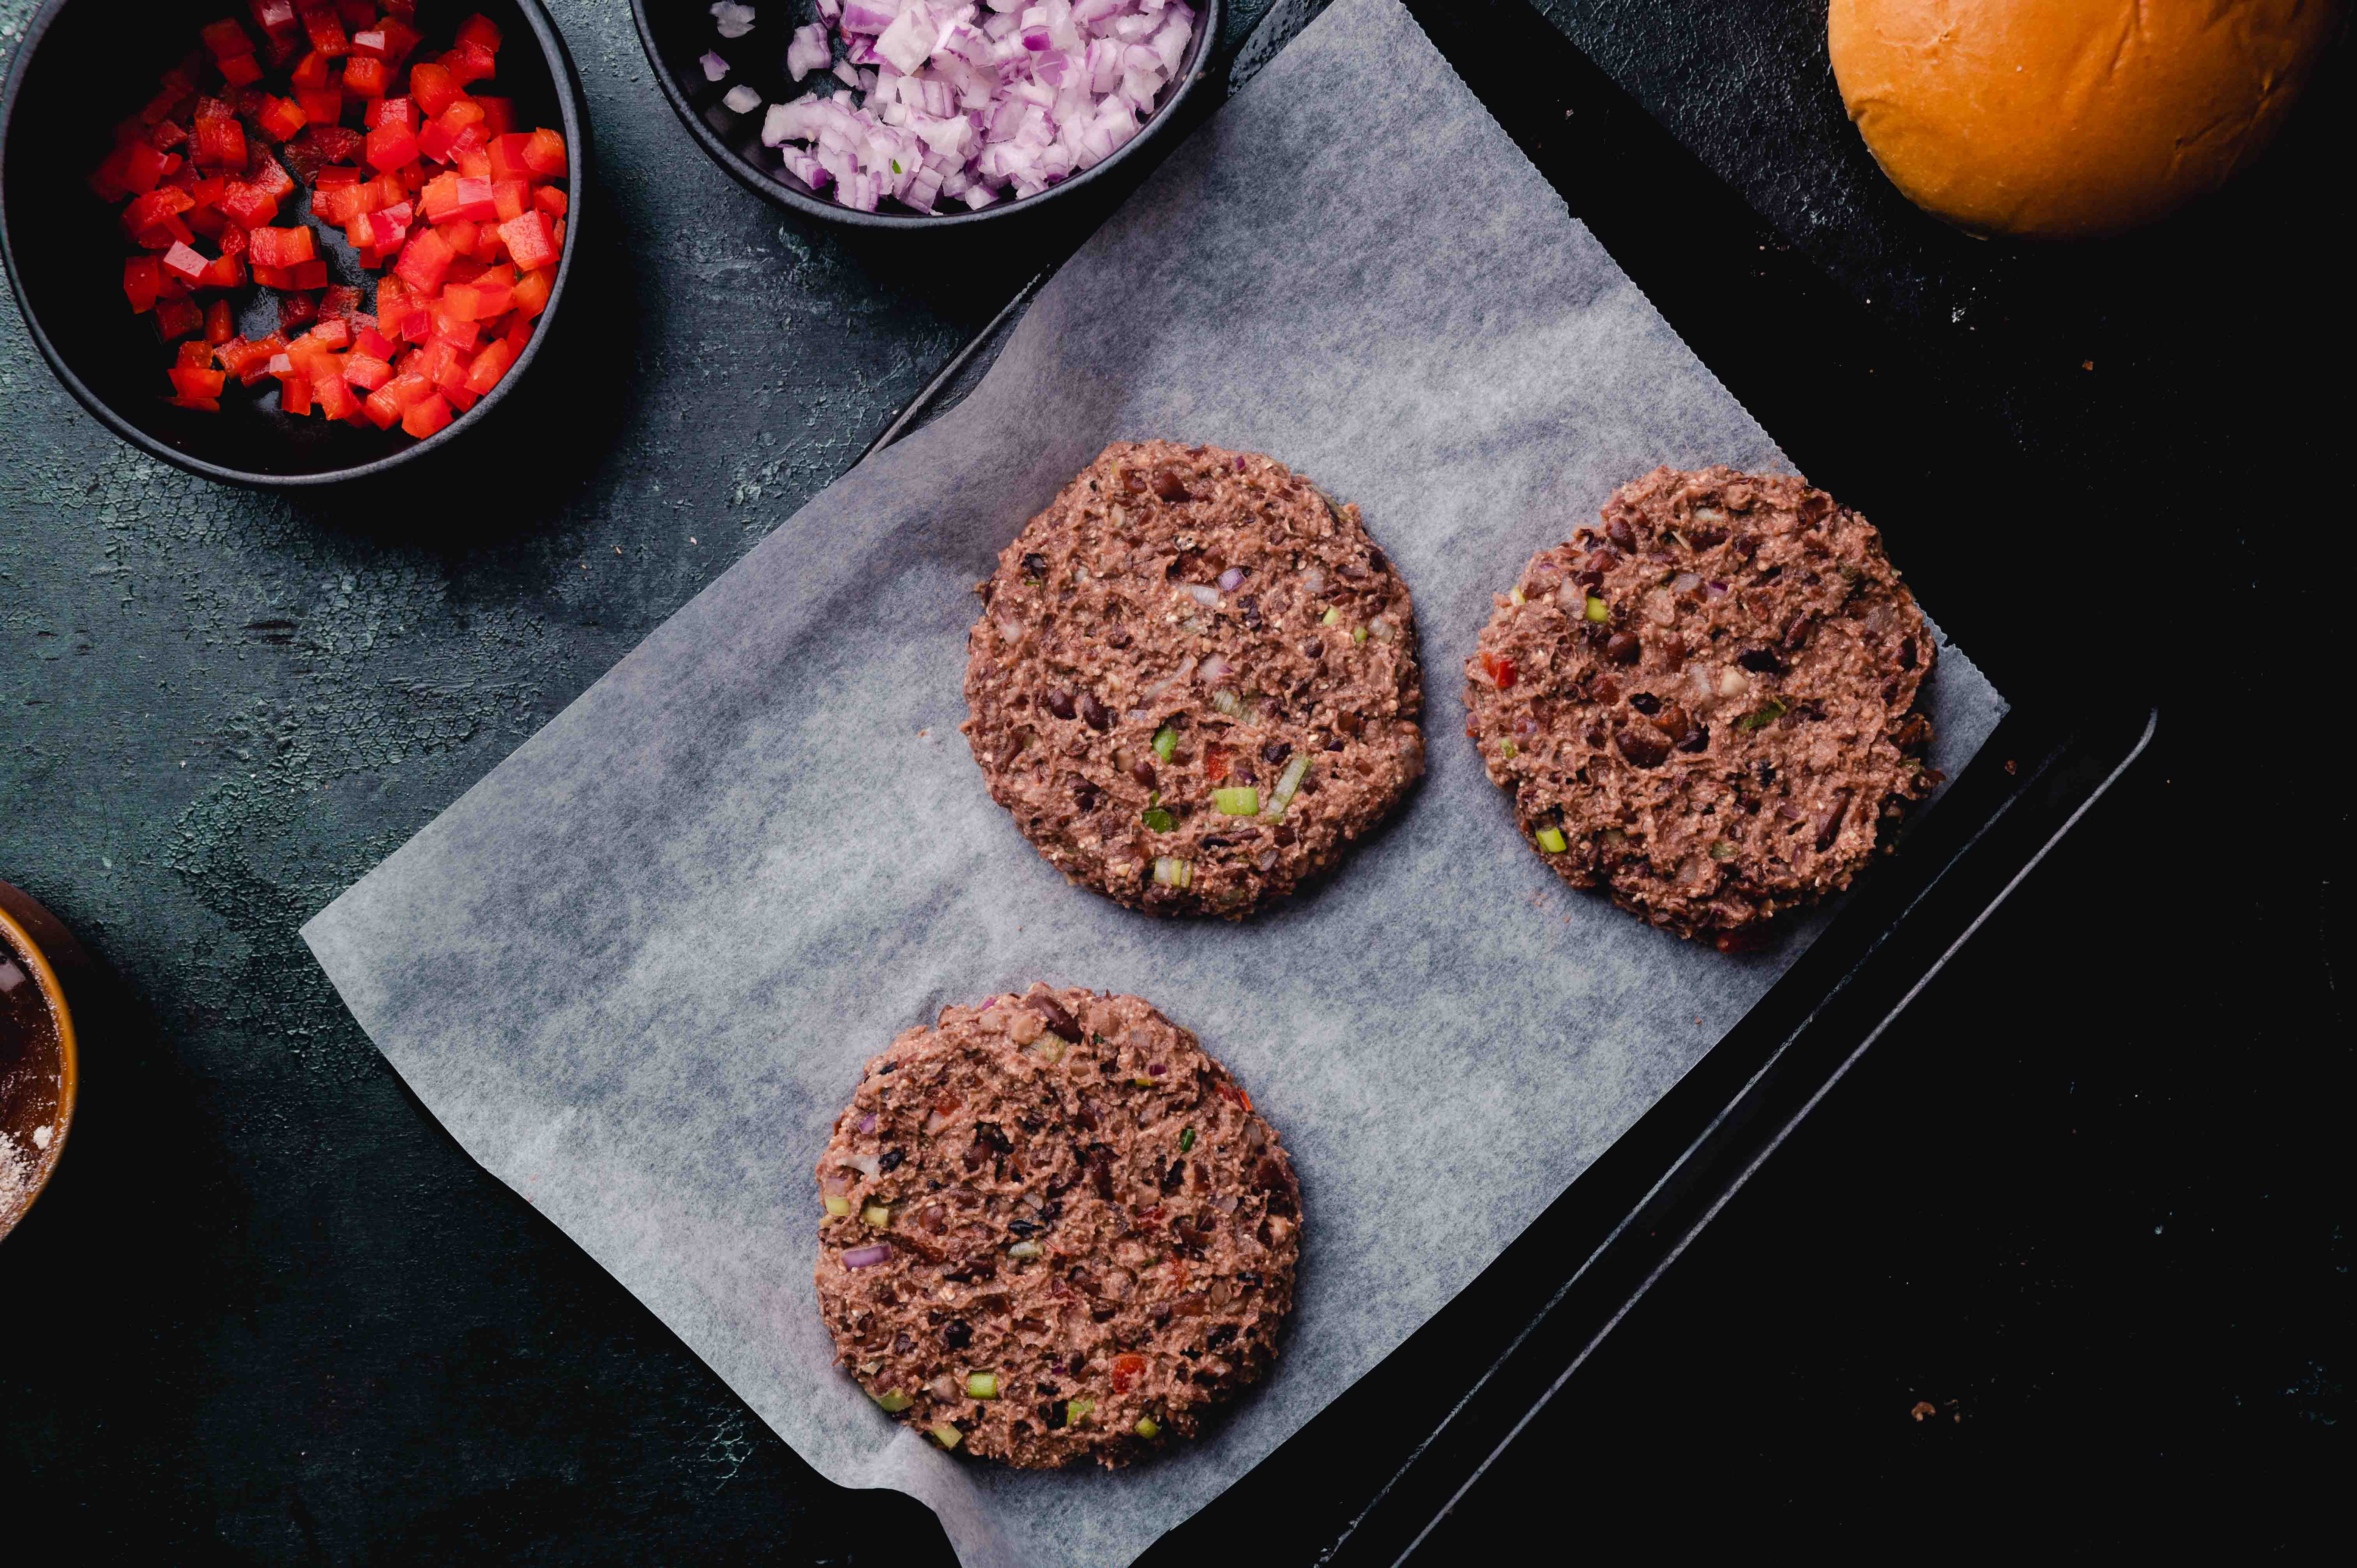 Three raw hamburger patties with diced vegetables on parchment paper, surrounded by chopped ingredients and a bun on a dark surface.